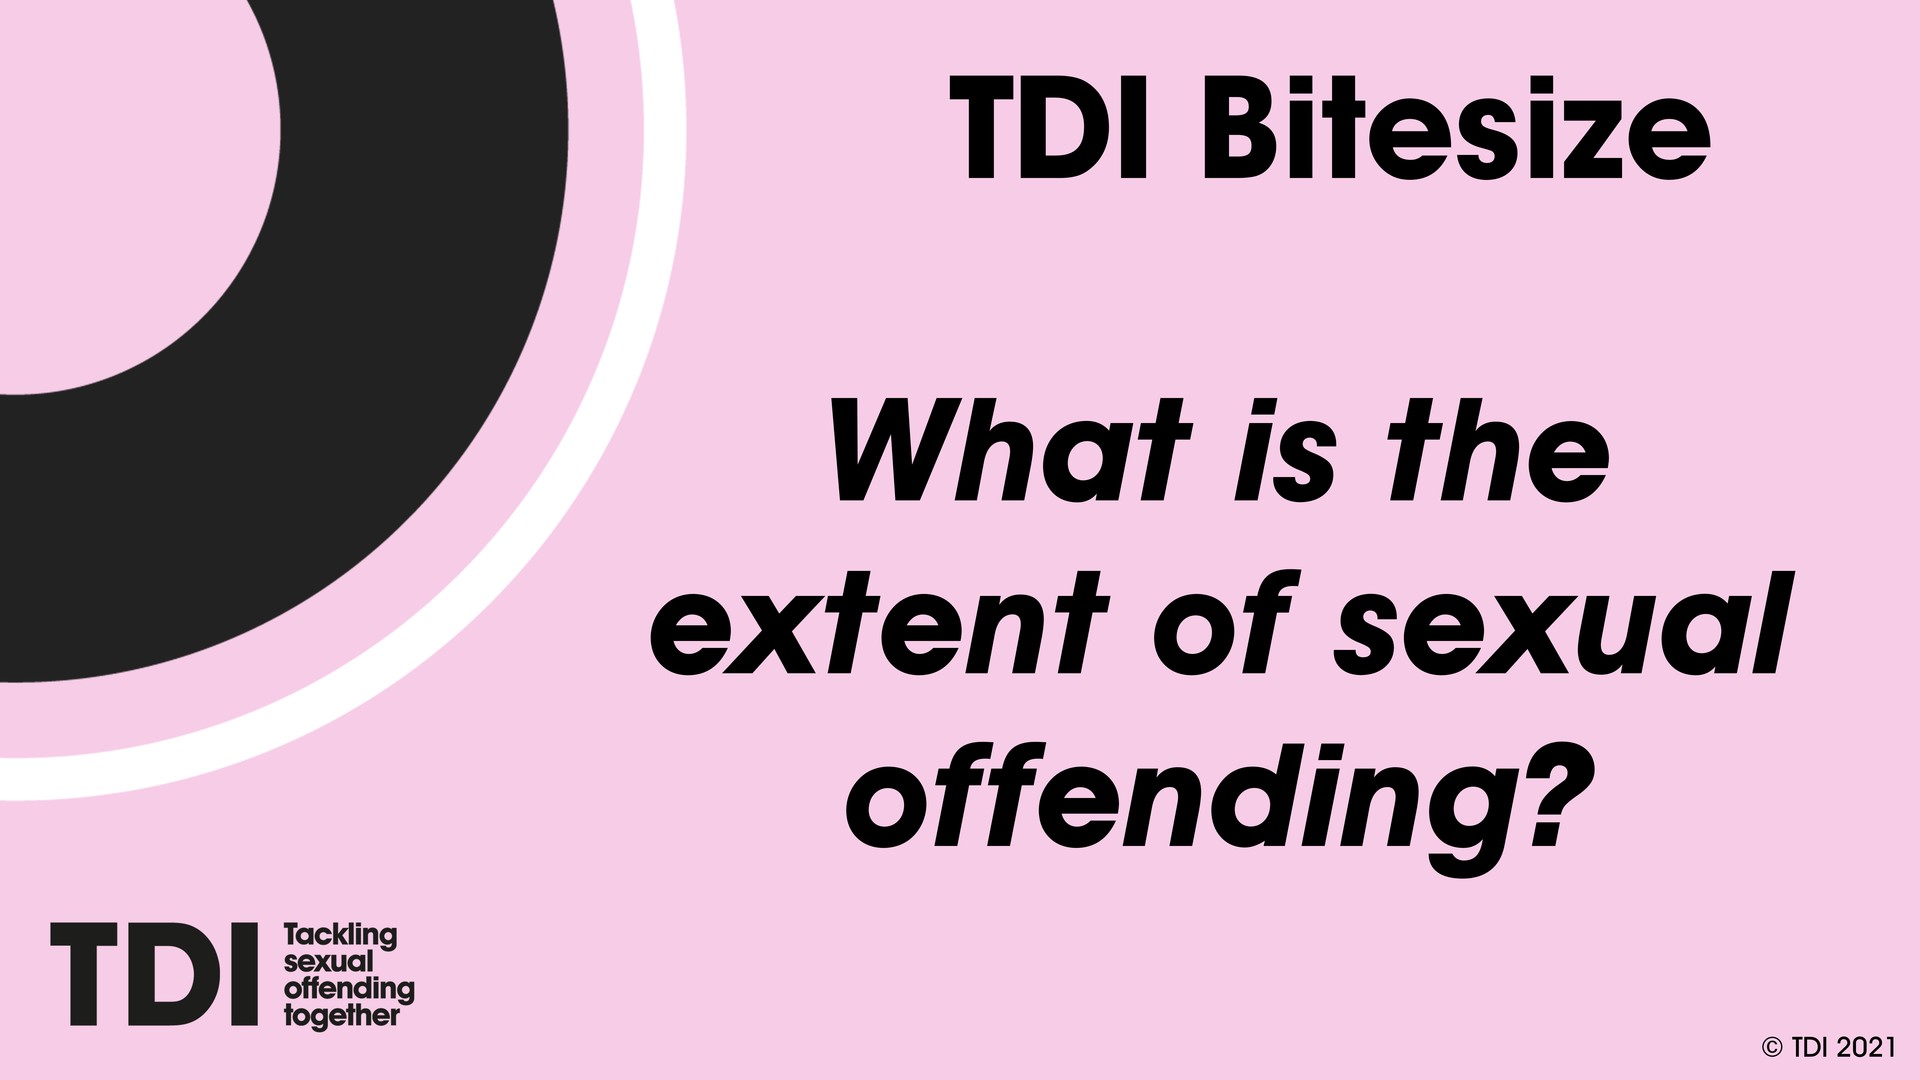 What is the extent of sexual offending?